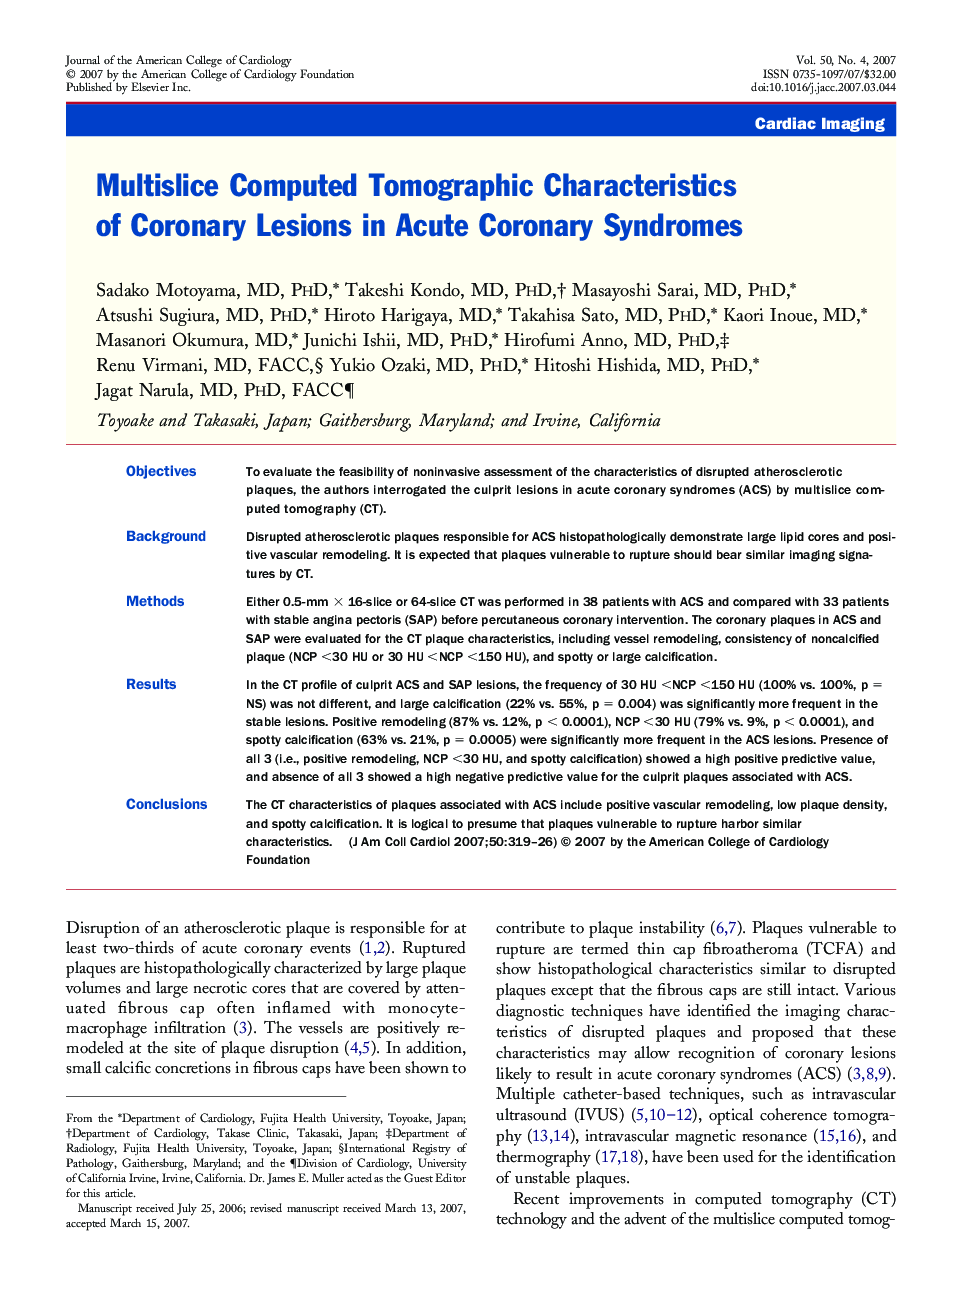 Multislice Computed Tomographic Characteristics of Coronary Lesions in Acute Coronary Syndromes 